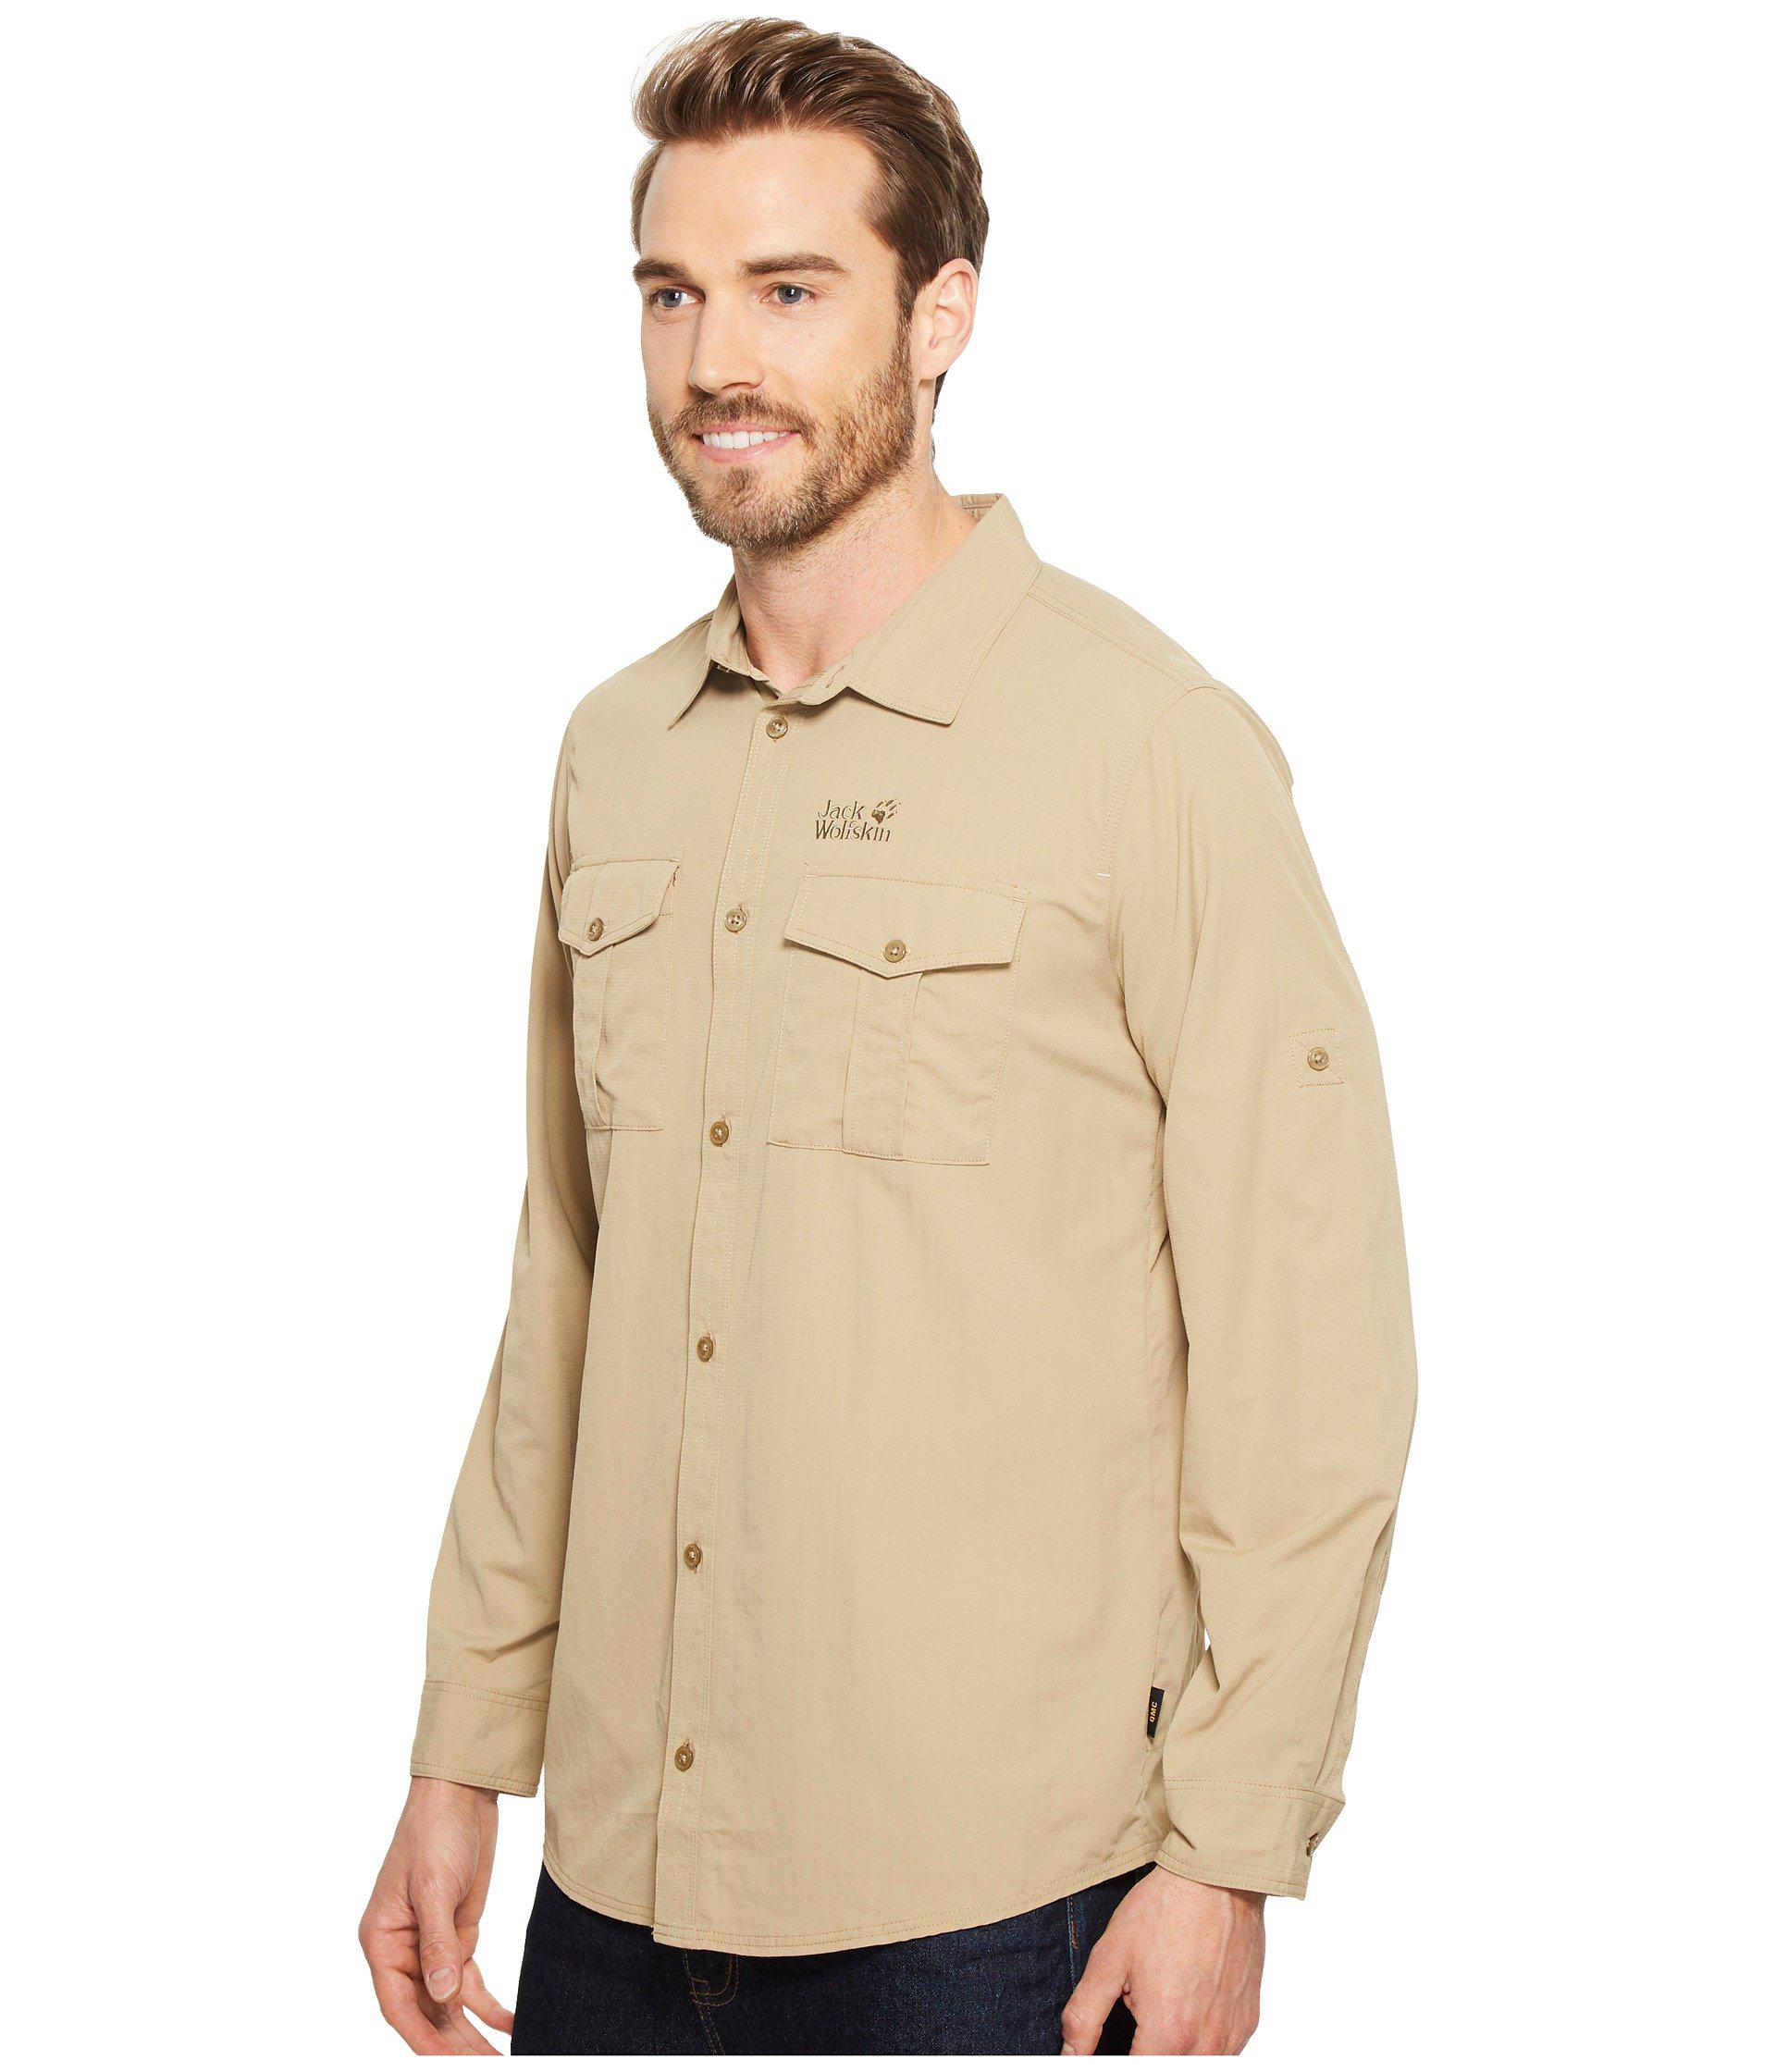 Jack Wolfskin Synthetic Atacama Roll-up Shirt in Natural for Men - Lyst